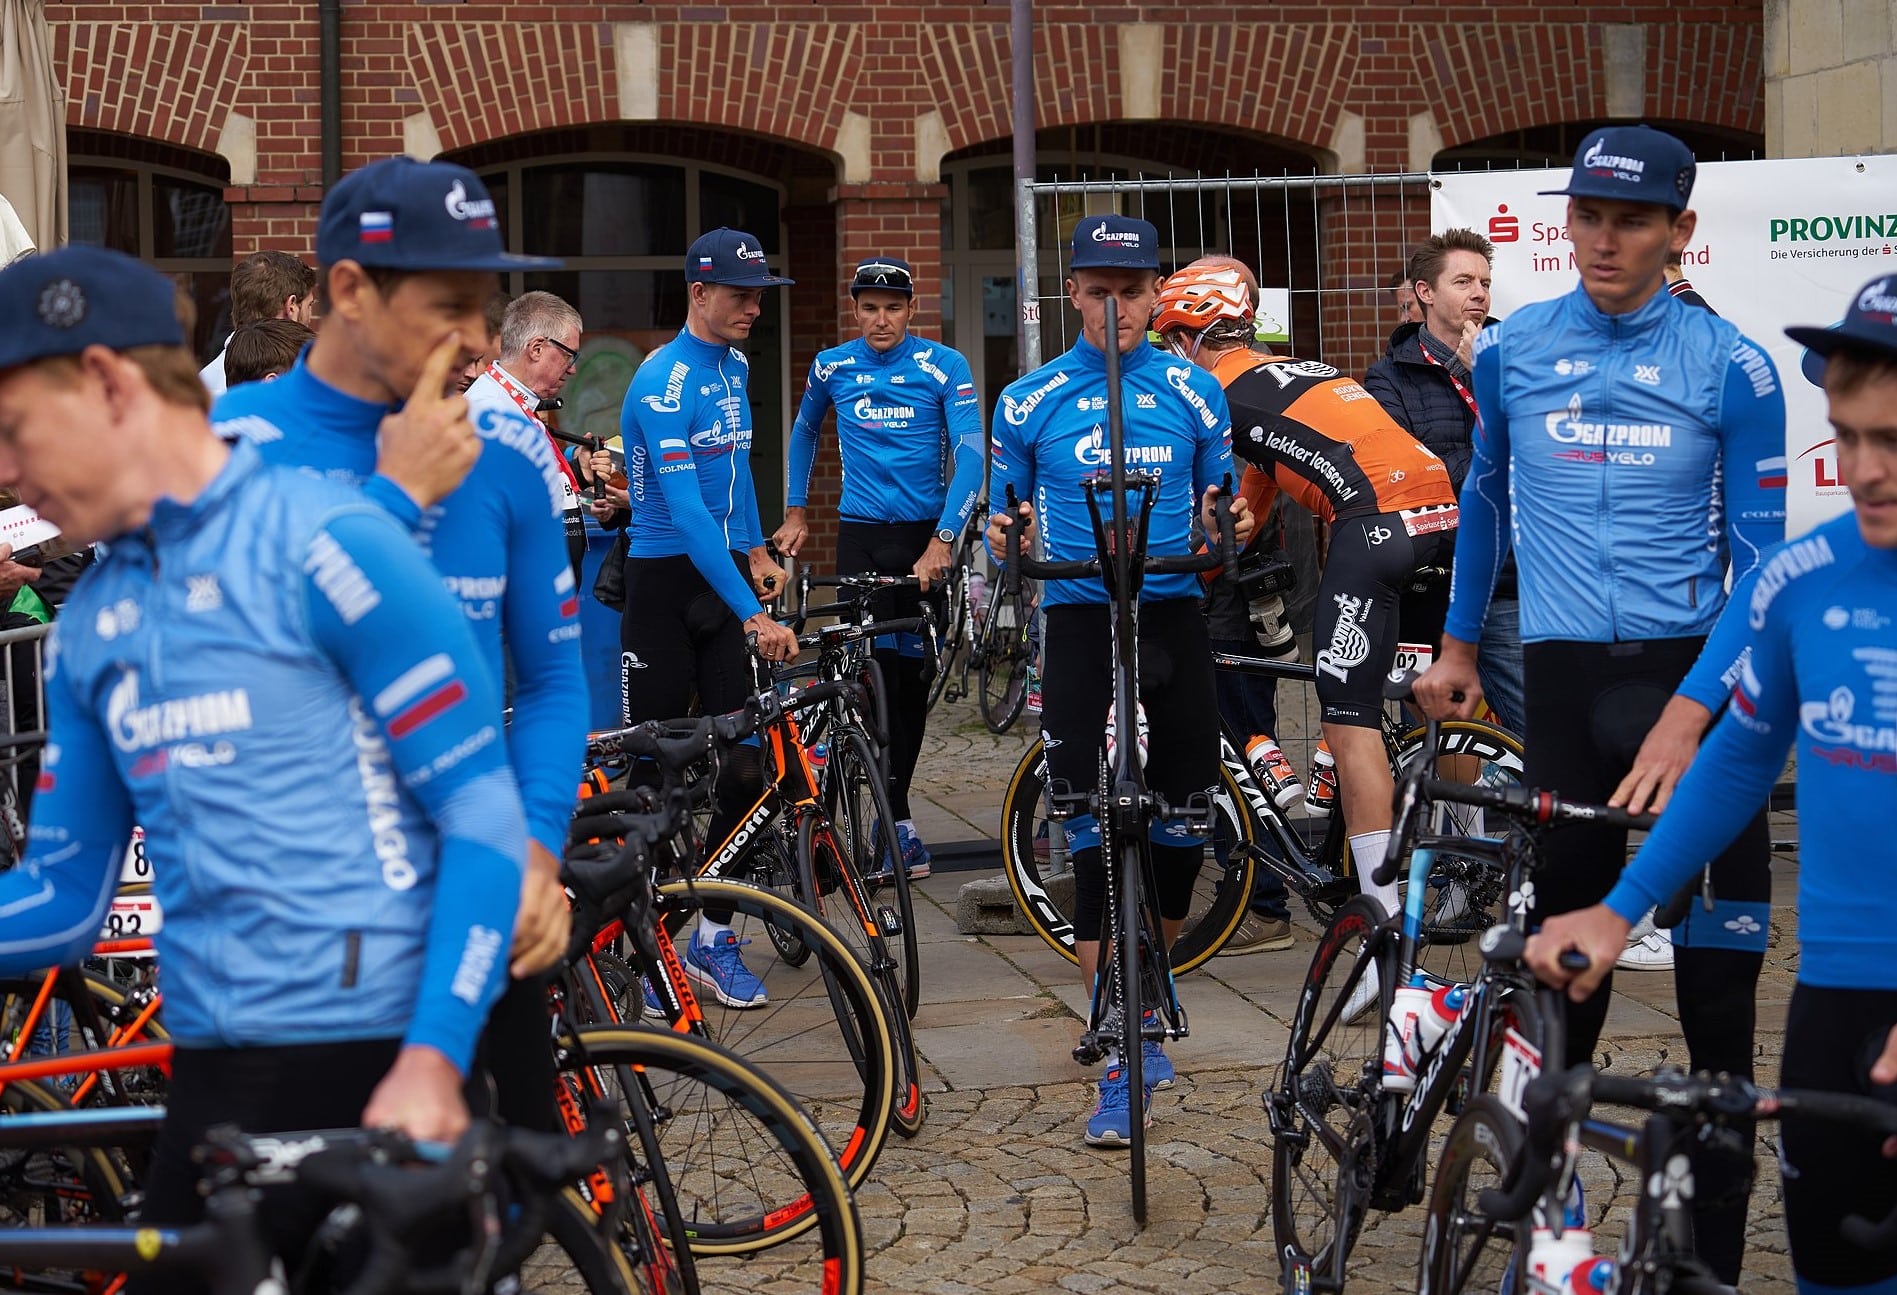 the Gazprom-sponsored cycling team, all men in blue jerseys with bikes